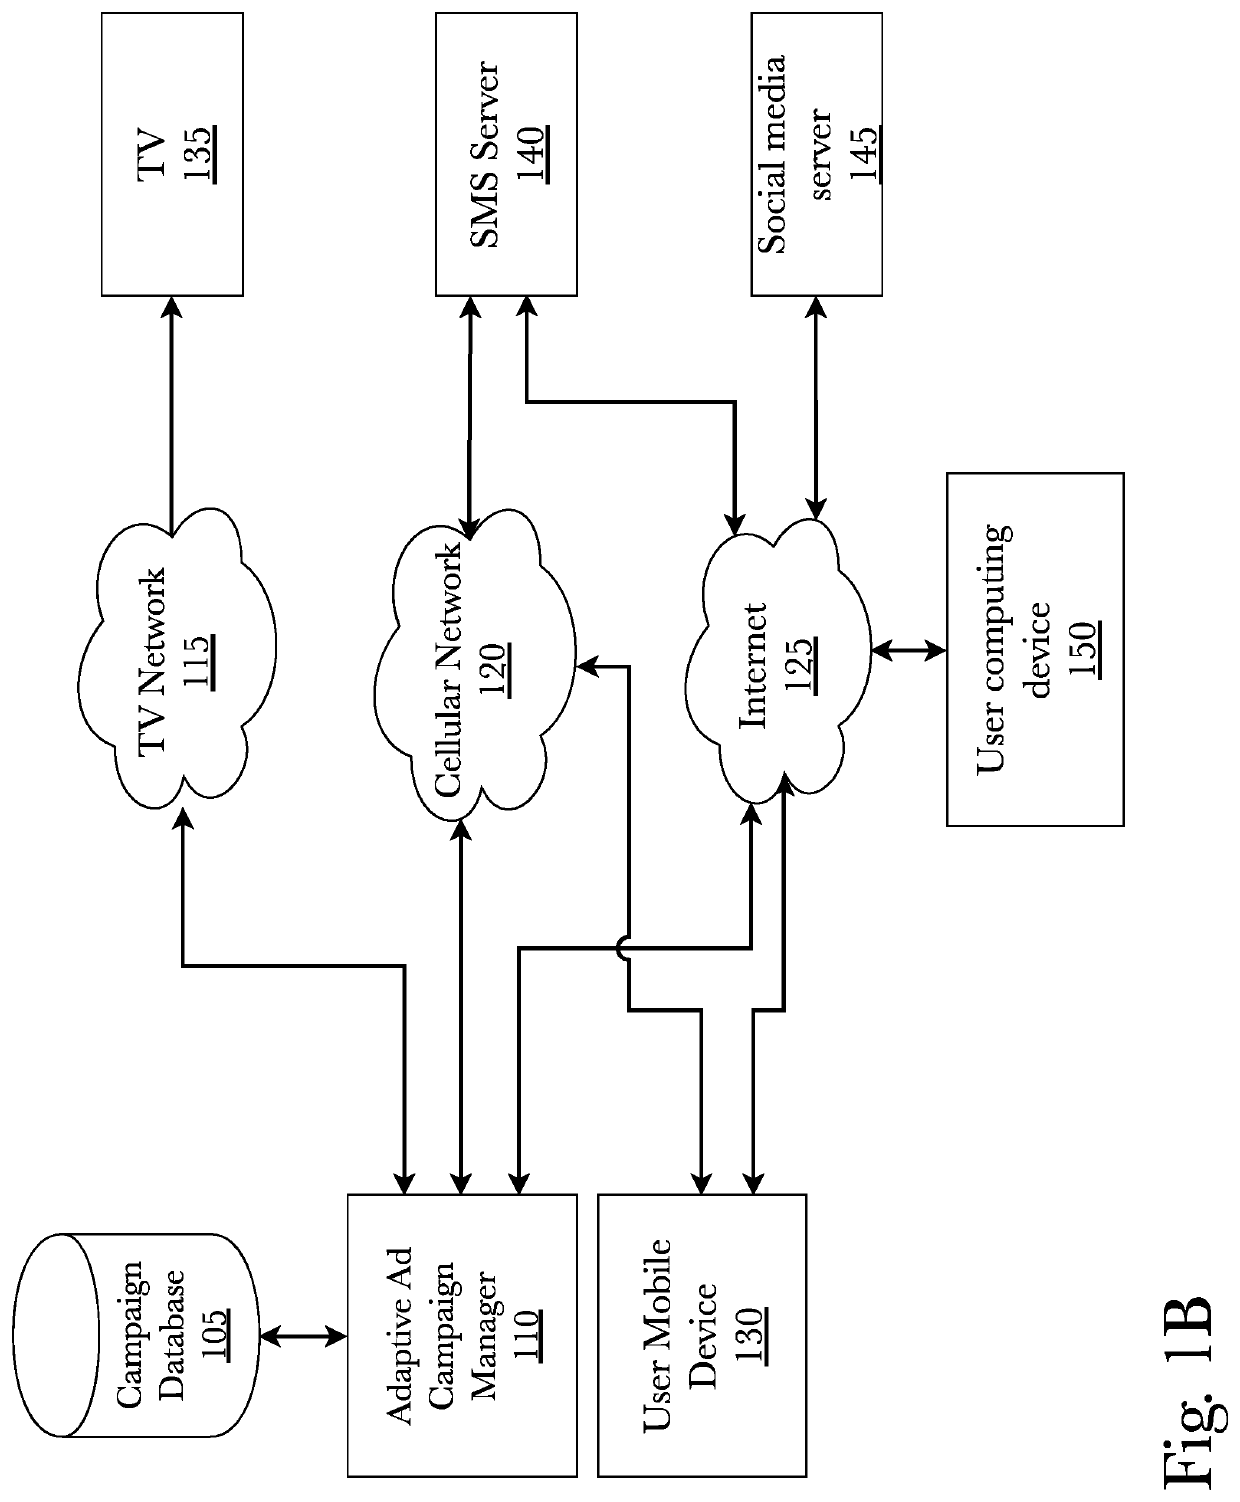 System and method for advertisement campaign tracking and management utilizing near-field communications